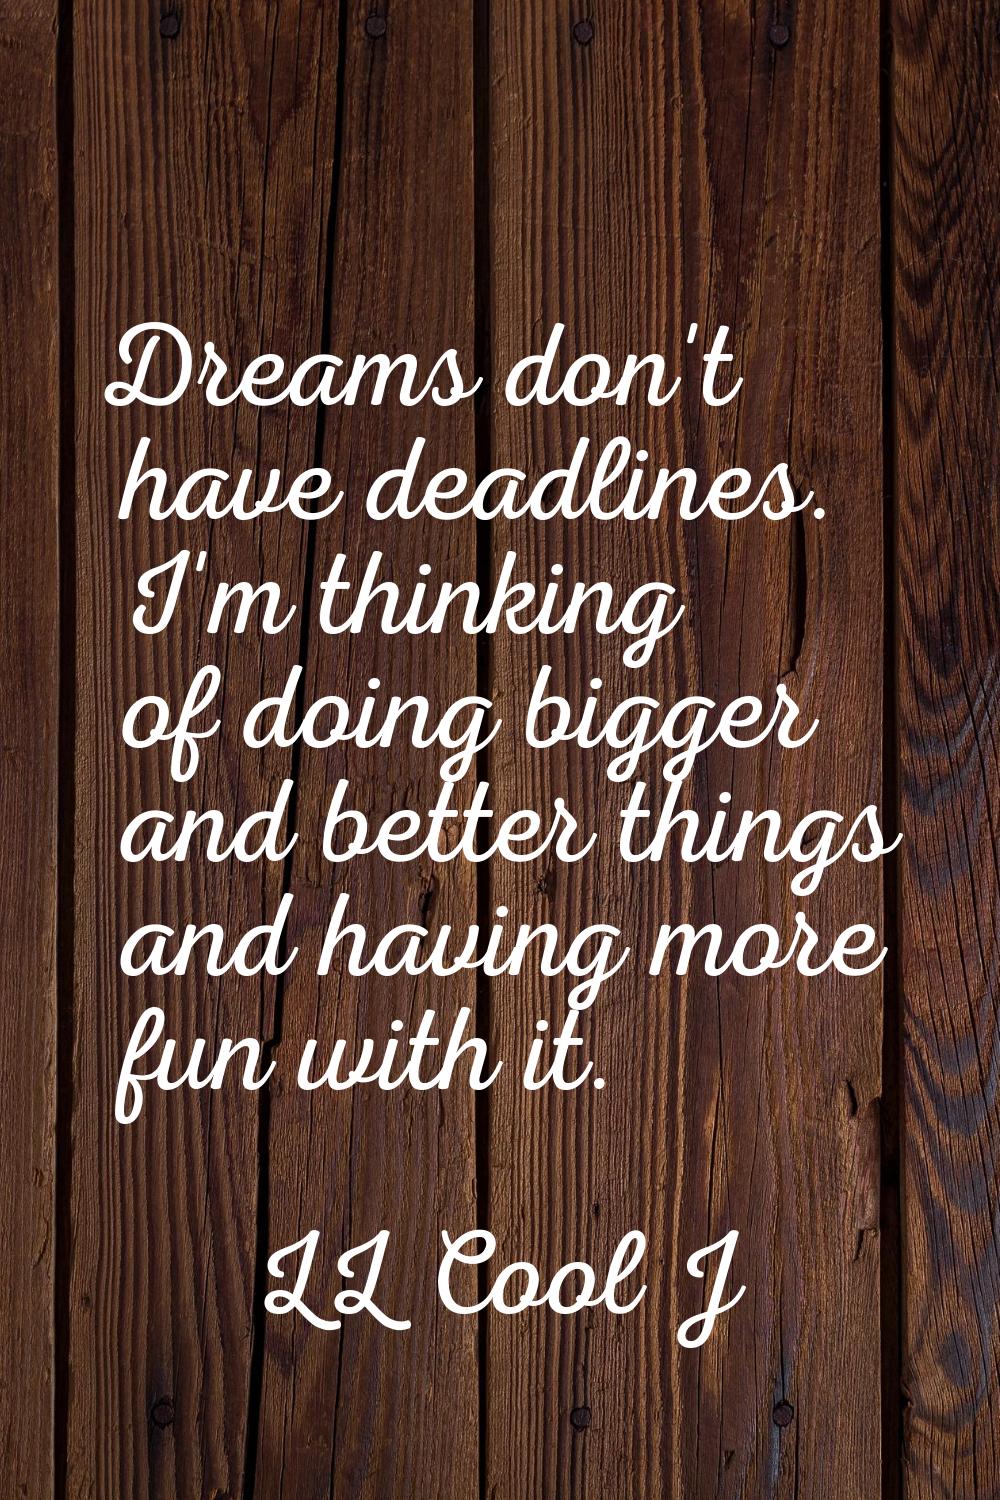 Dreams don't have deadlines. I'm thinking of doing bigger and better things and having more fun wit